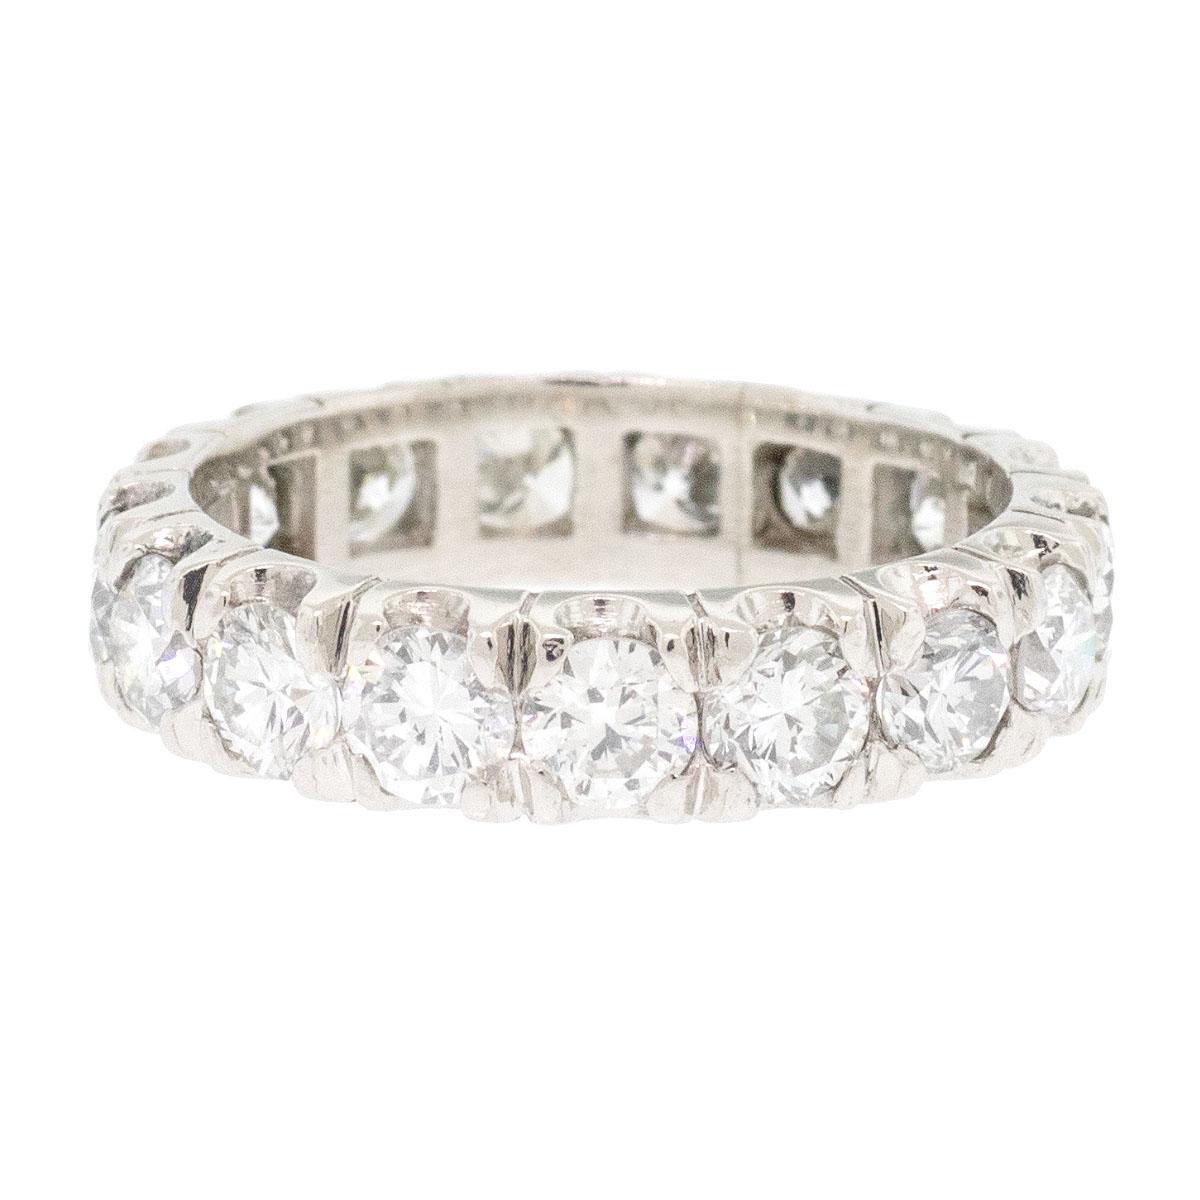 Platinum 1.75ctw Round Cut Diamond Eternity Wedding Band

When it comes to symbolizing eternal love, nothing quite captures the essence like a diamond eternity wedding band. The Platinum 1.75ctw Round Cut Diamond Eternity Wedding Band is a